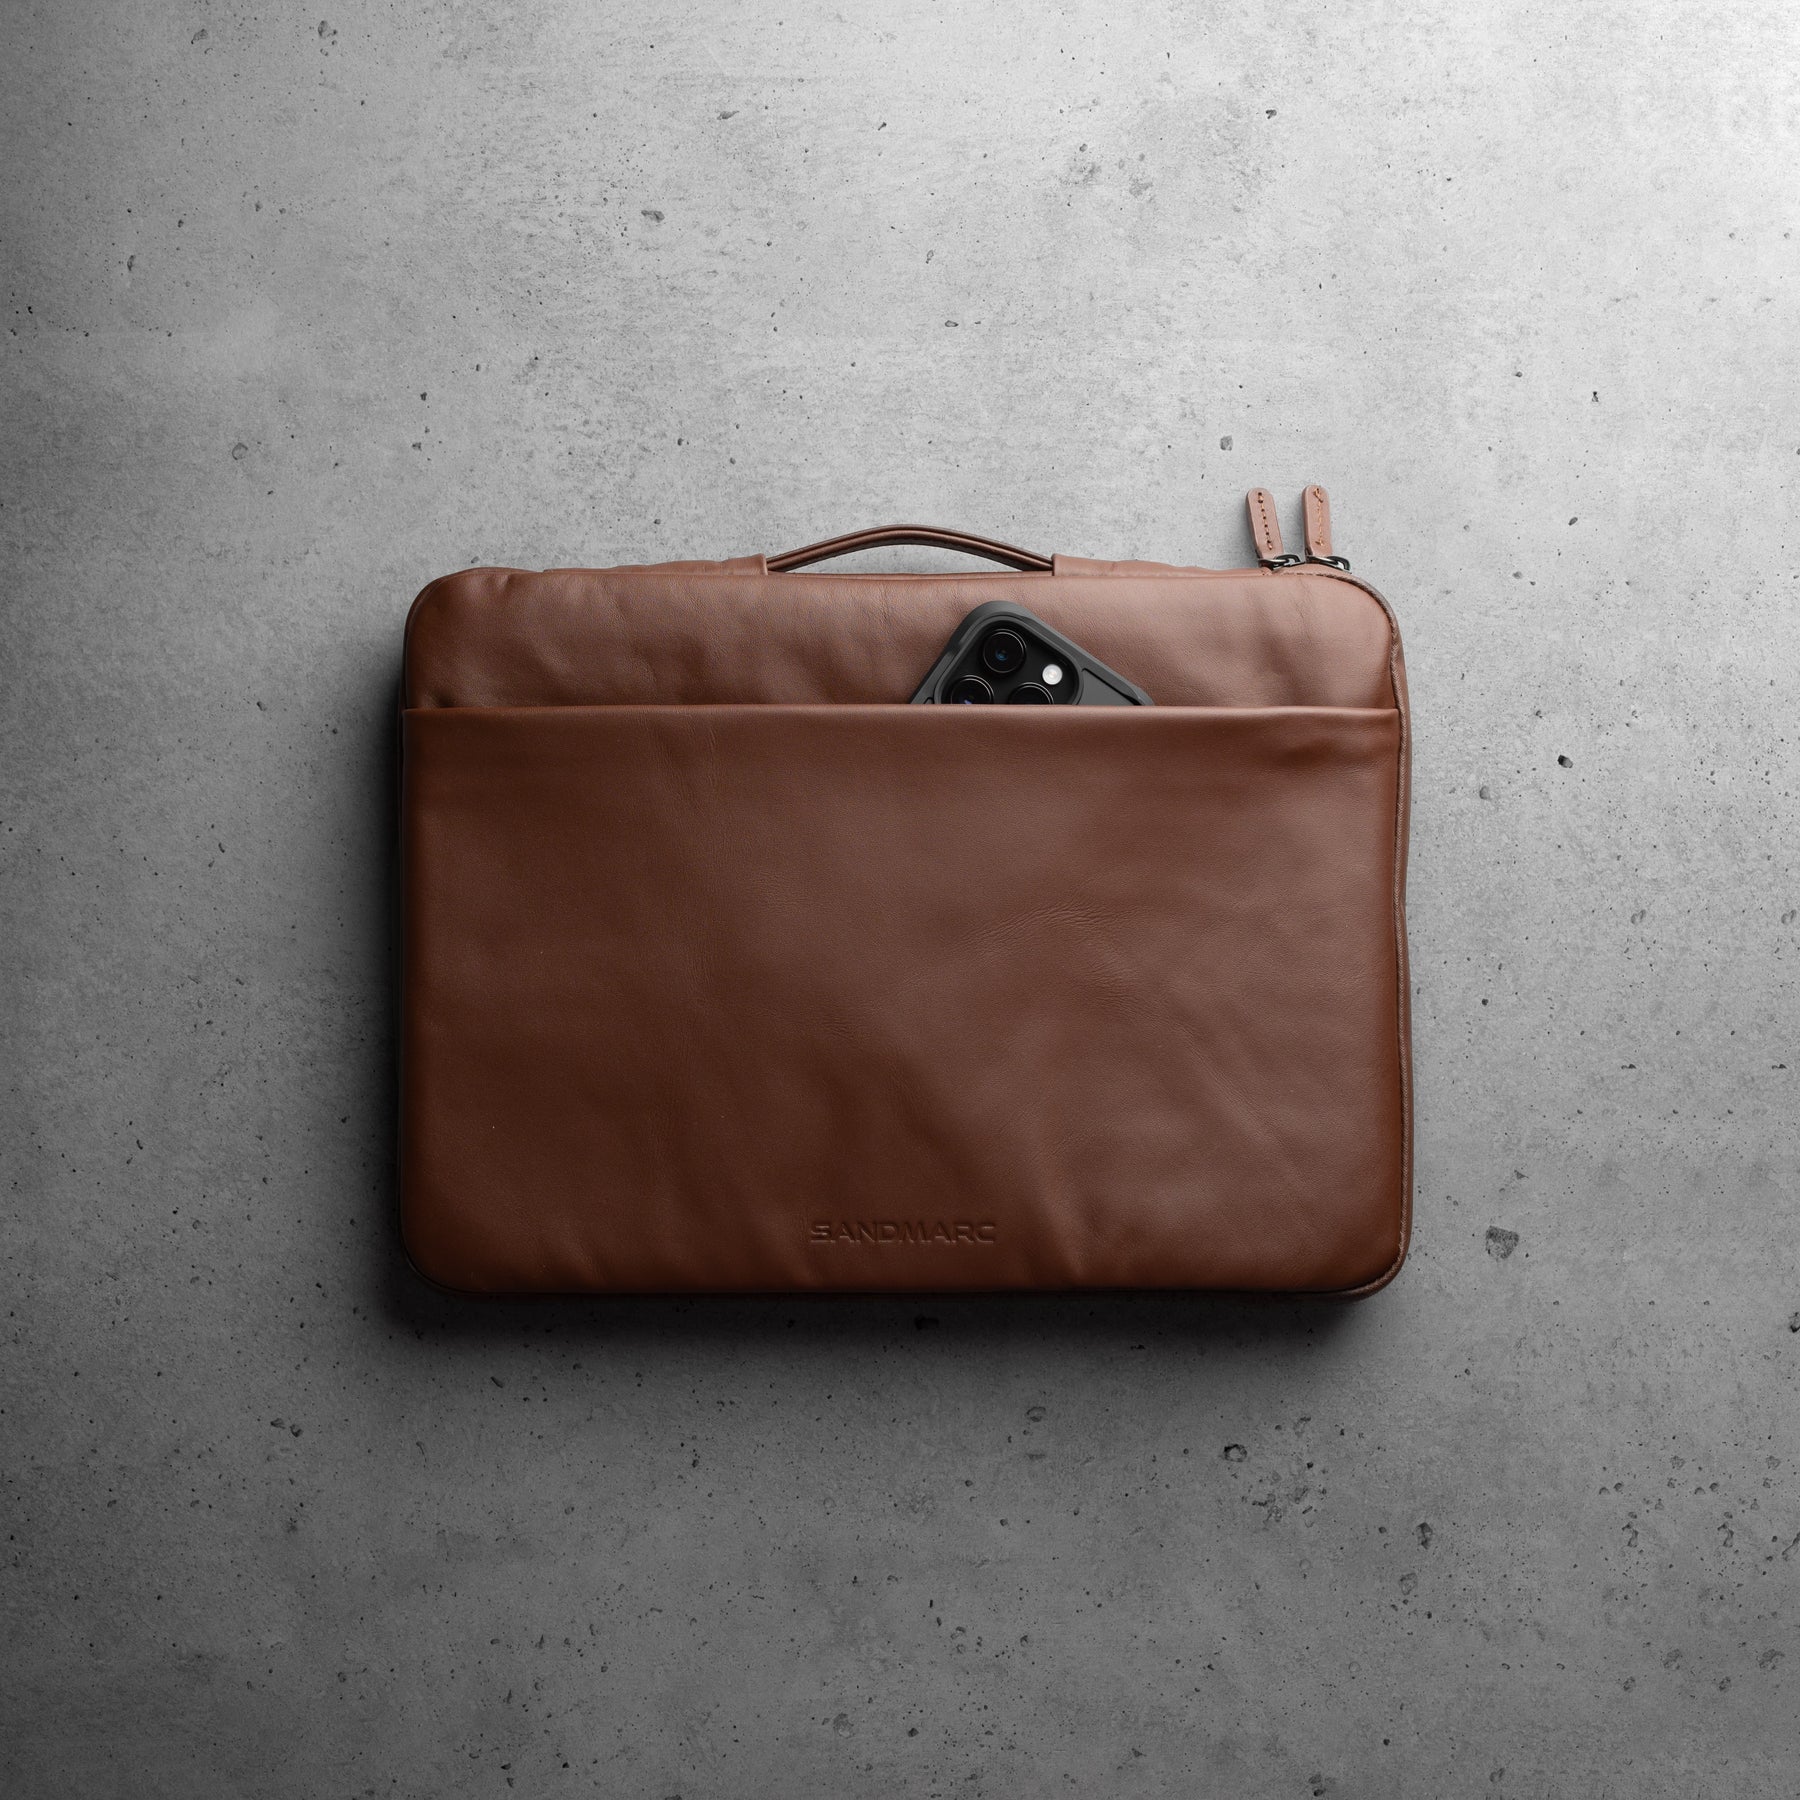 MacBook felt cover with leather for MacBook Pro/Air